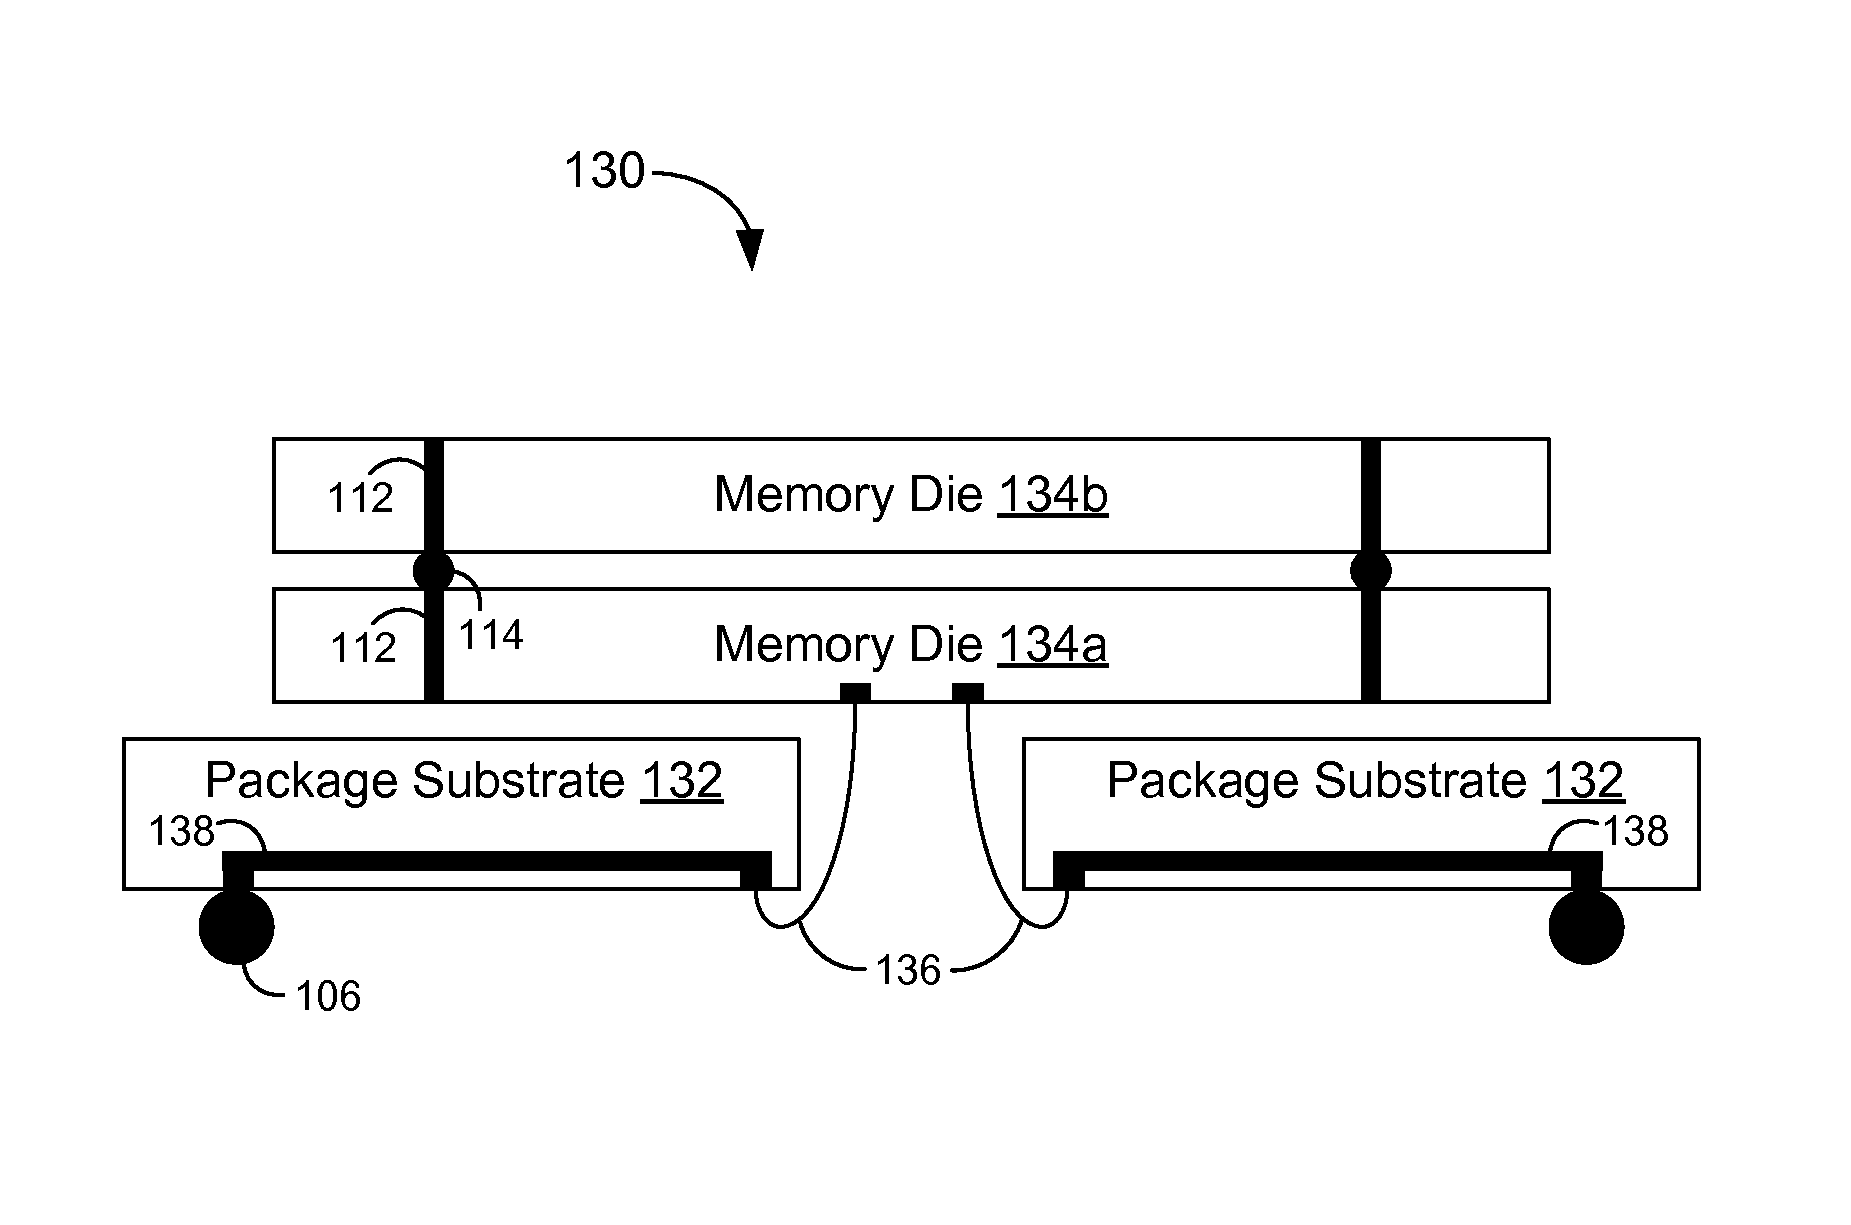 Memory bandwidth aggregation using simultaneous access of stacked semiconductor memory die